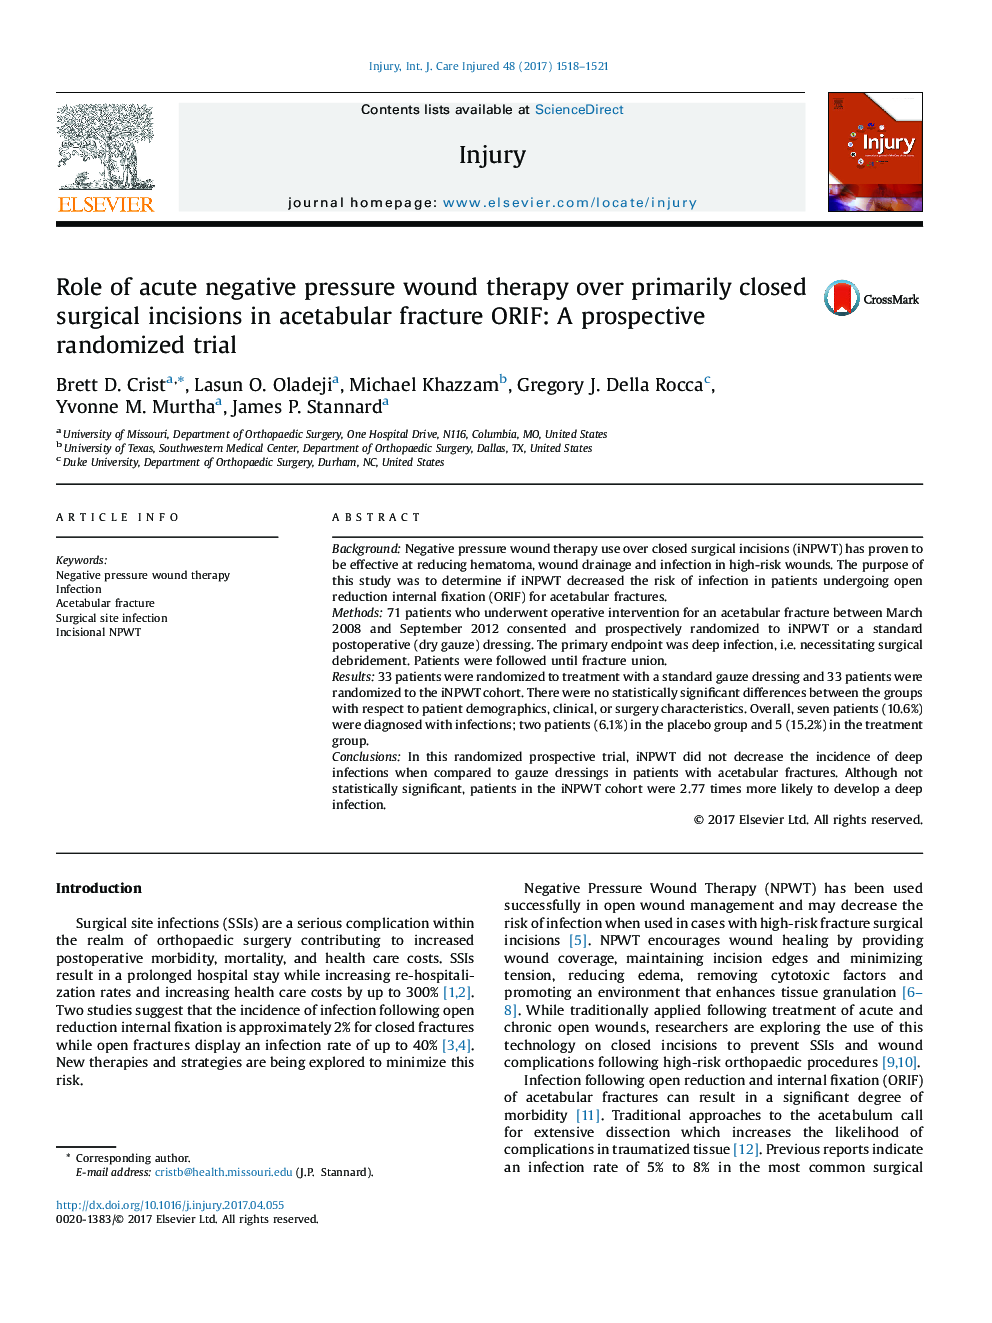 Role of acute negative pressure wound therapy over primarily closed surgical incisions in acetabular fracture ORIF: A prospective randomized trial